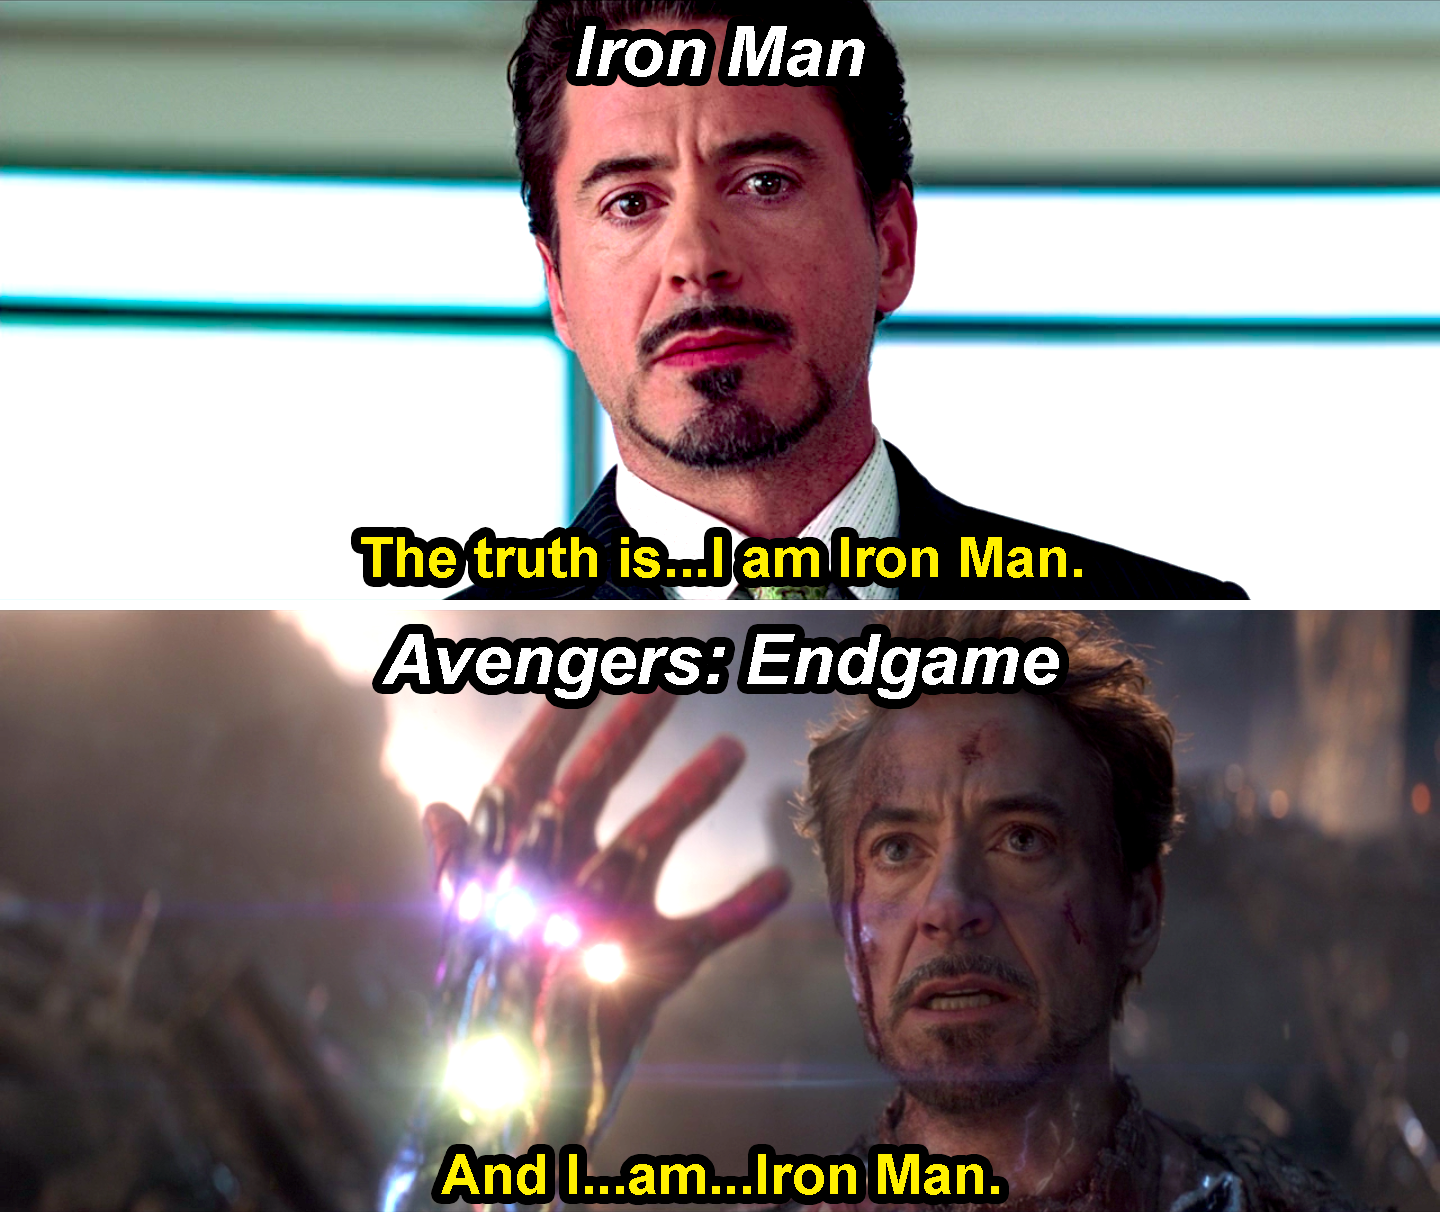 Tony saying, &quot;The truth is I am Iron Man,&quot; in Iron Man and saying, &quot;And I am Iron Man,&quot; before snapping in Avengers: Endgame